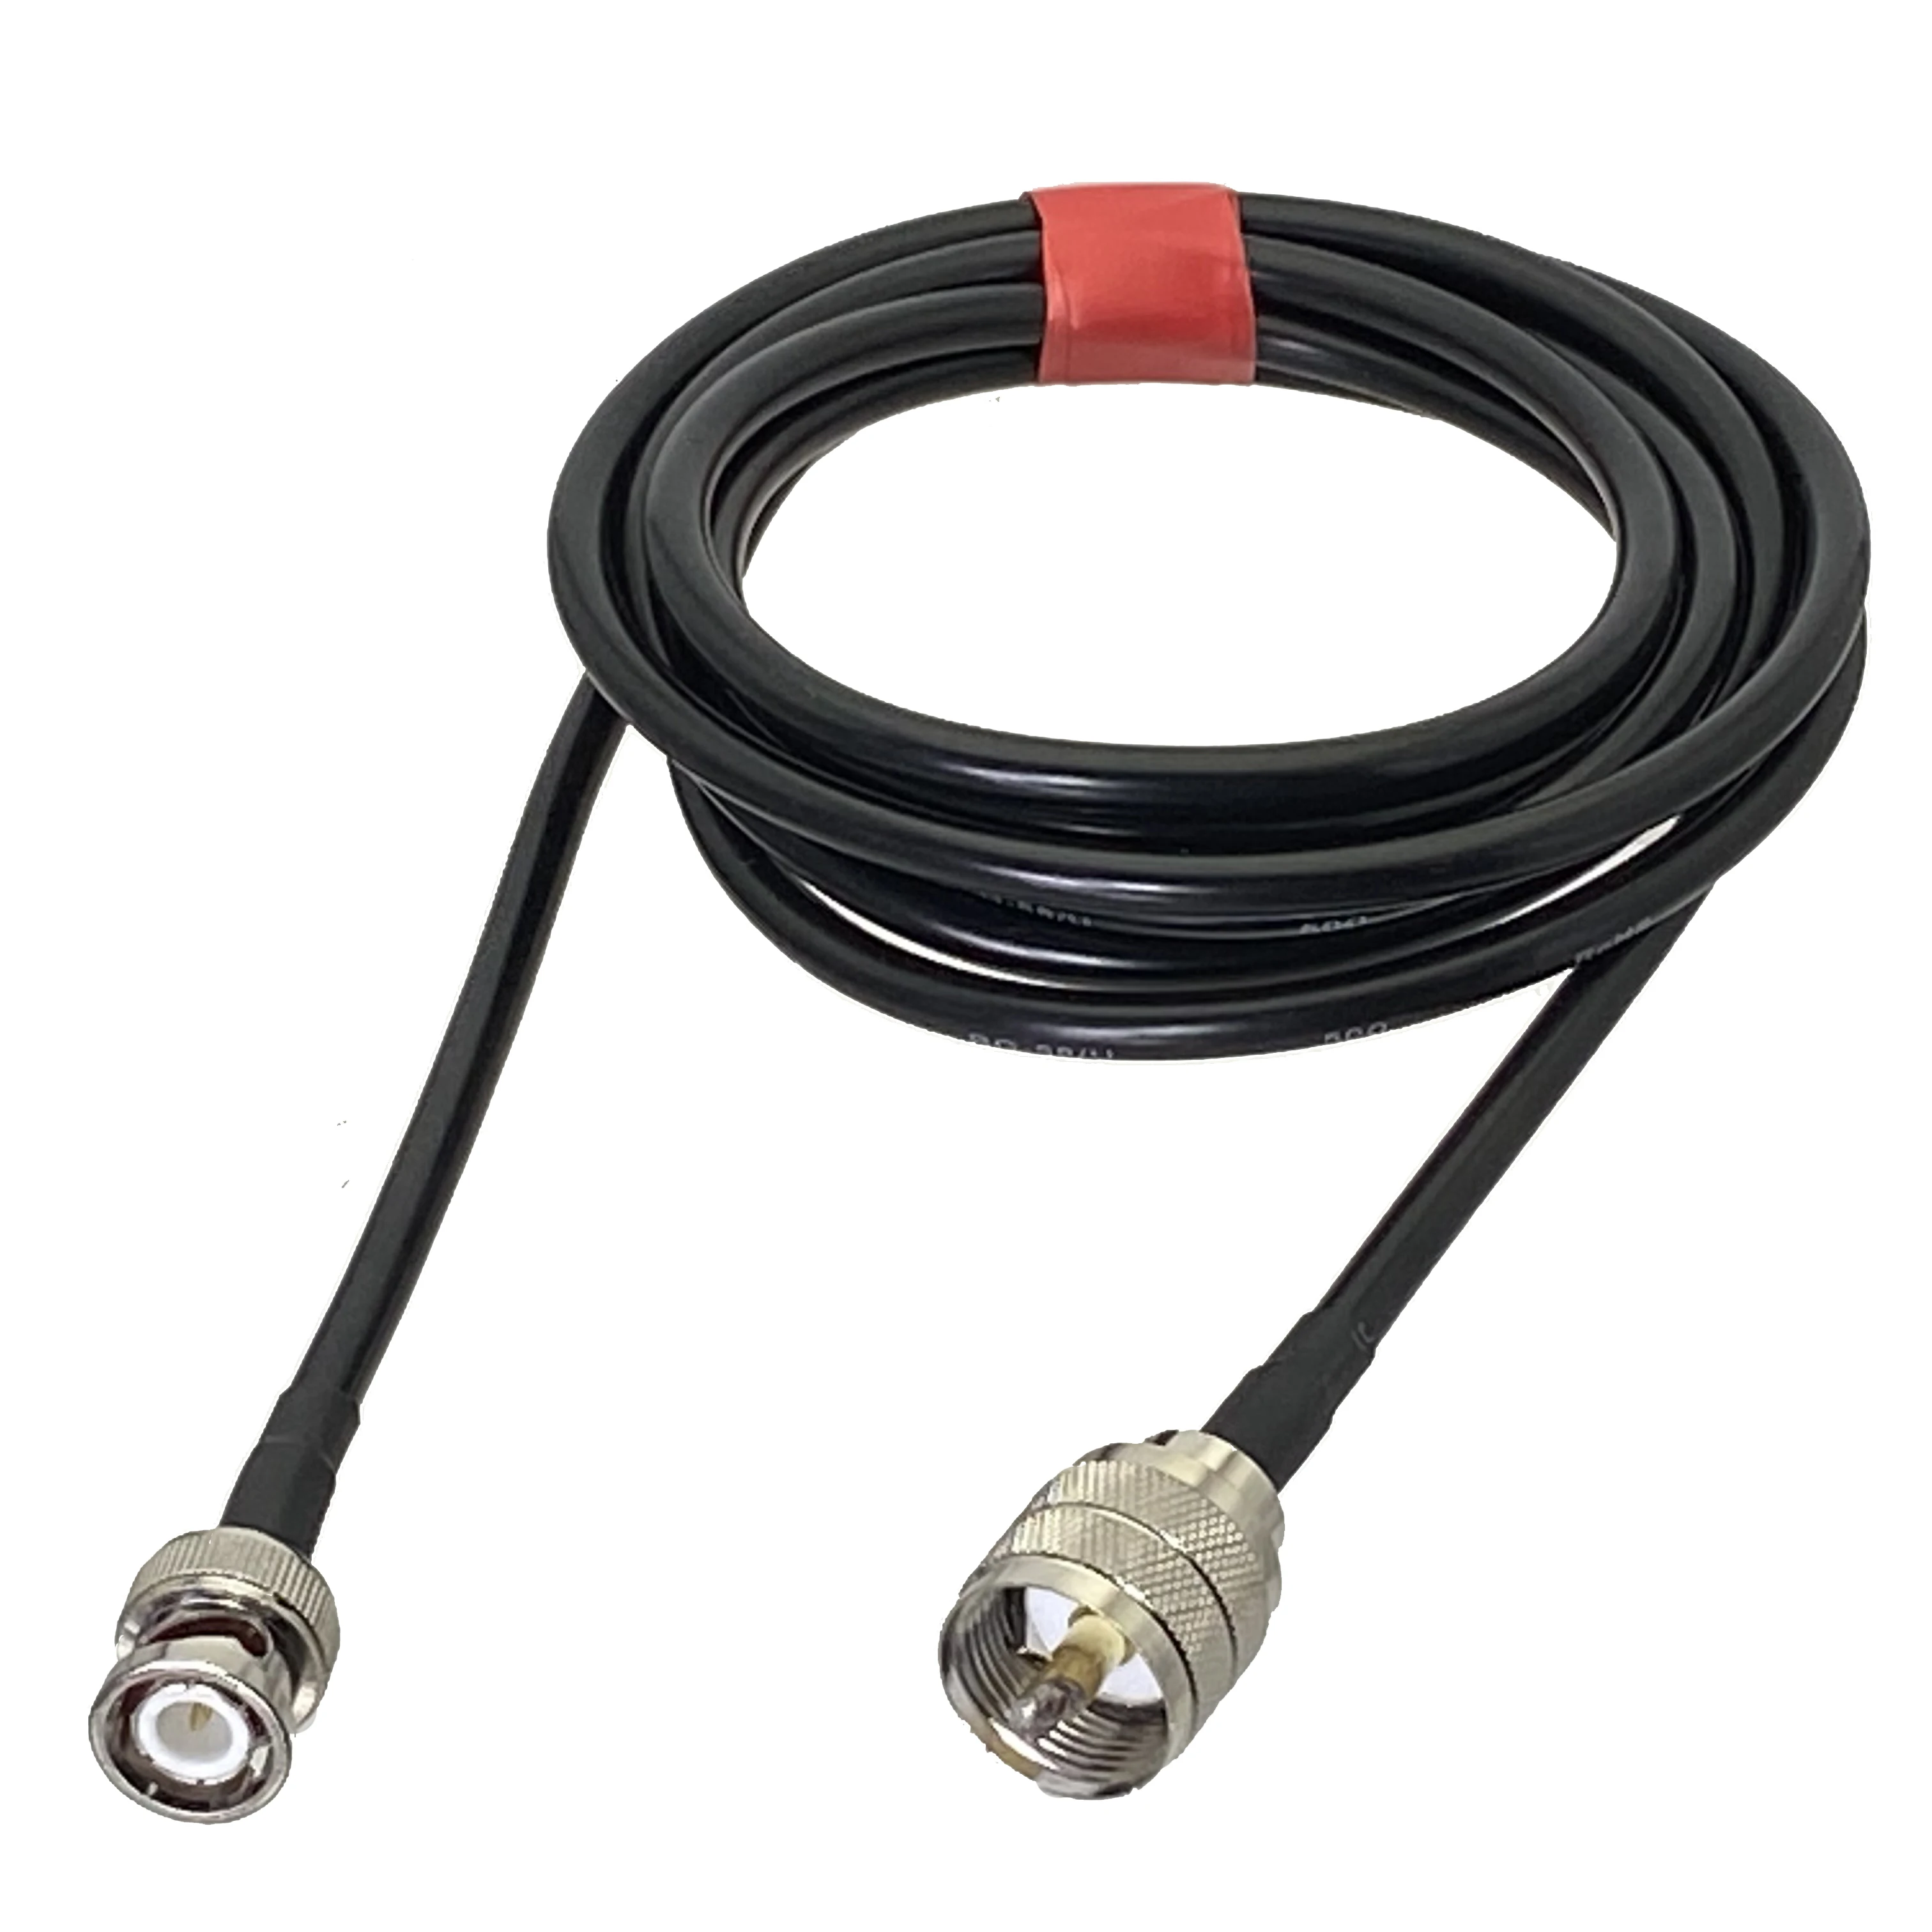 RG58 RF Pigtail BNC Male Plug to PL259 UHF Male Connector Straight Cable Jumper to the antenna transceiver 6inch~20M